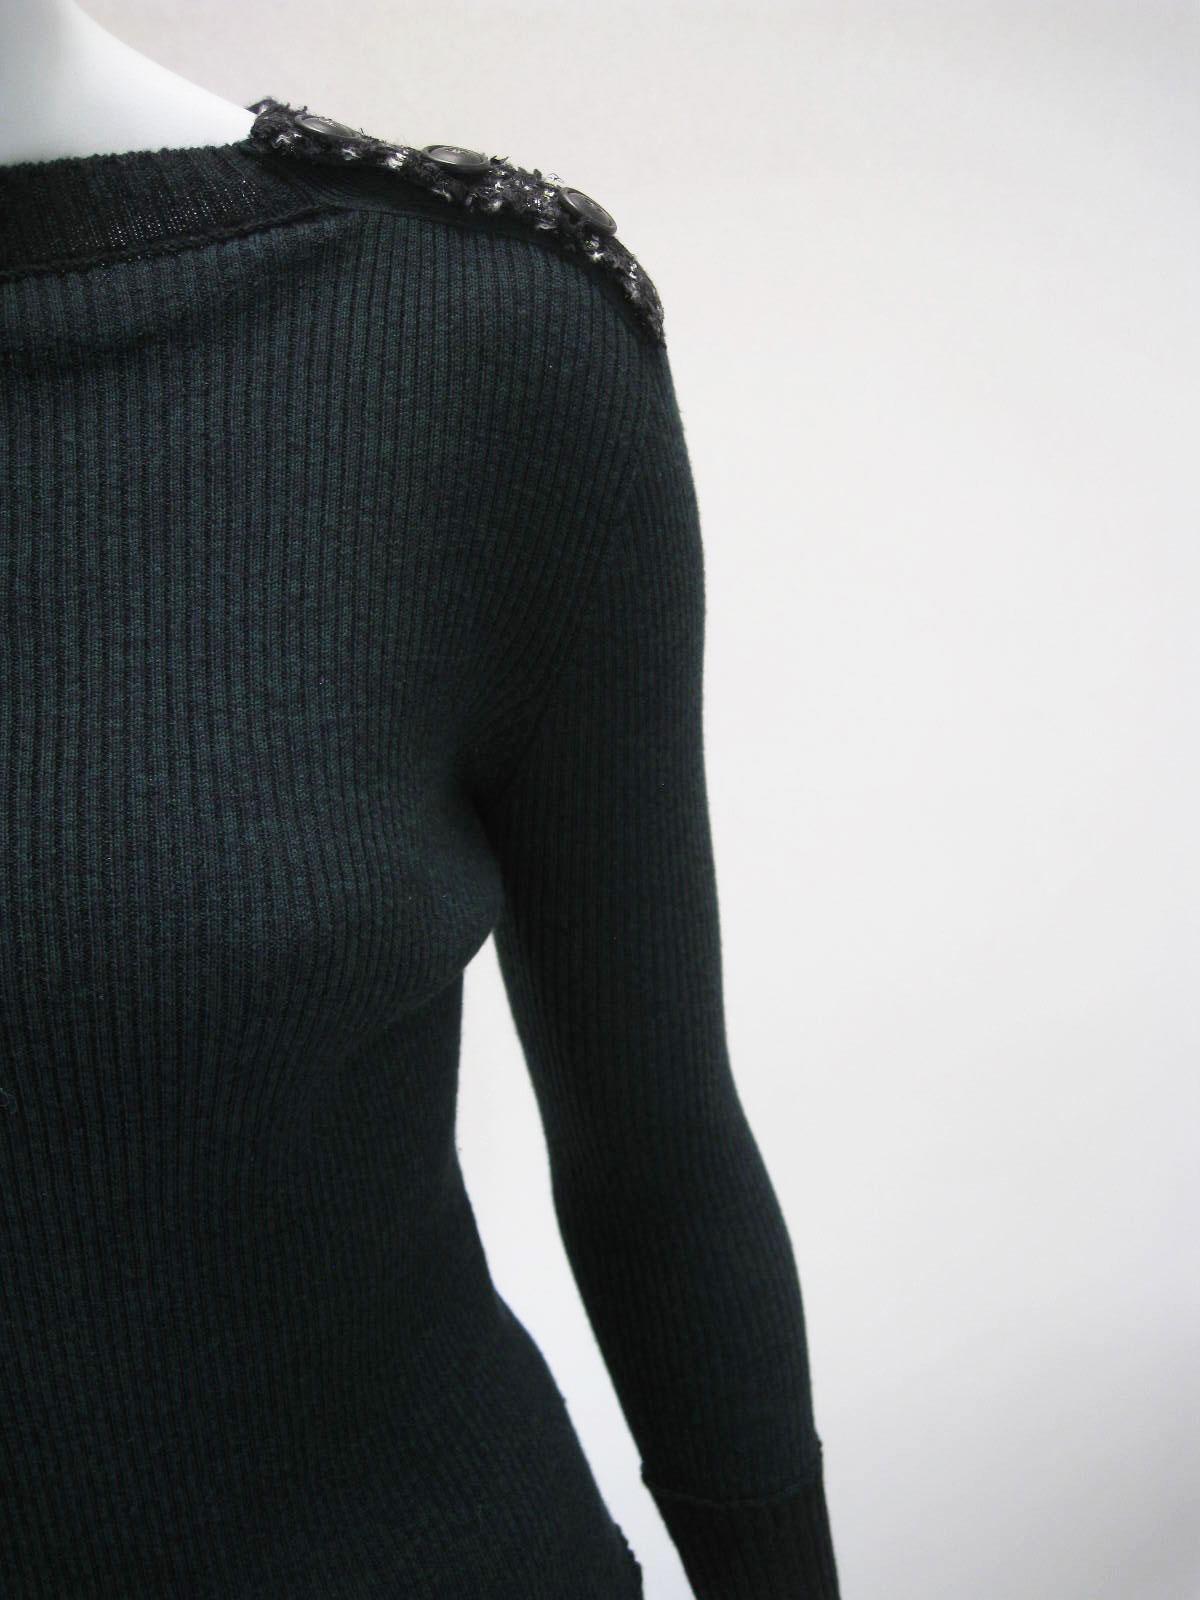 Chanel forest green and black ribbed knit sweater.

Deep green and black marled color.

Contrasting darker neckline and cuff.

Shoulder features black (with green and white) tweed epaulets with CC buttons.

Very clingy and stretchy.

Fabric is 90%